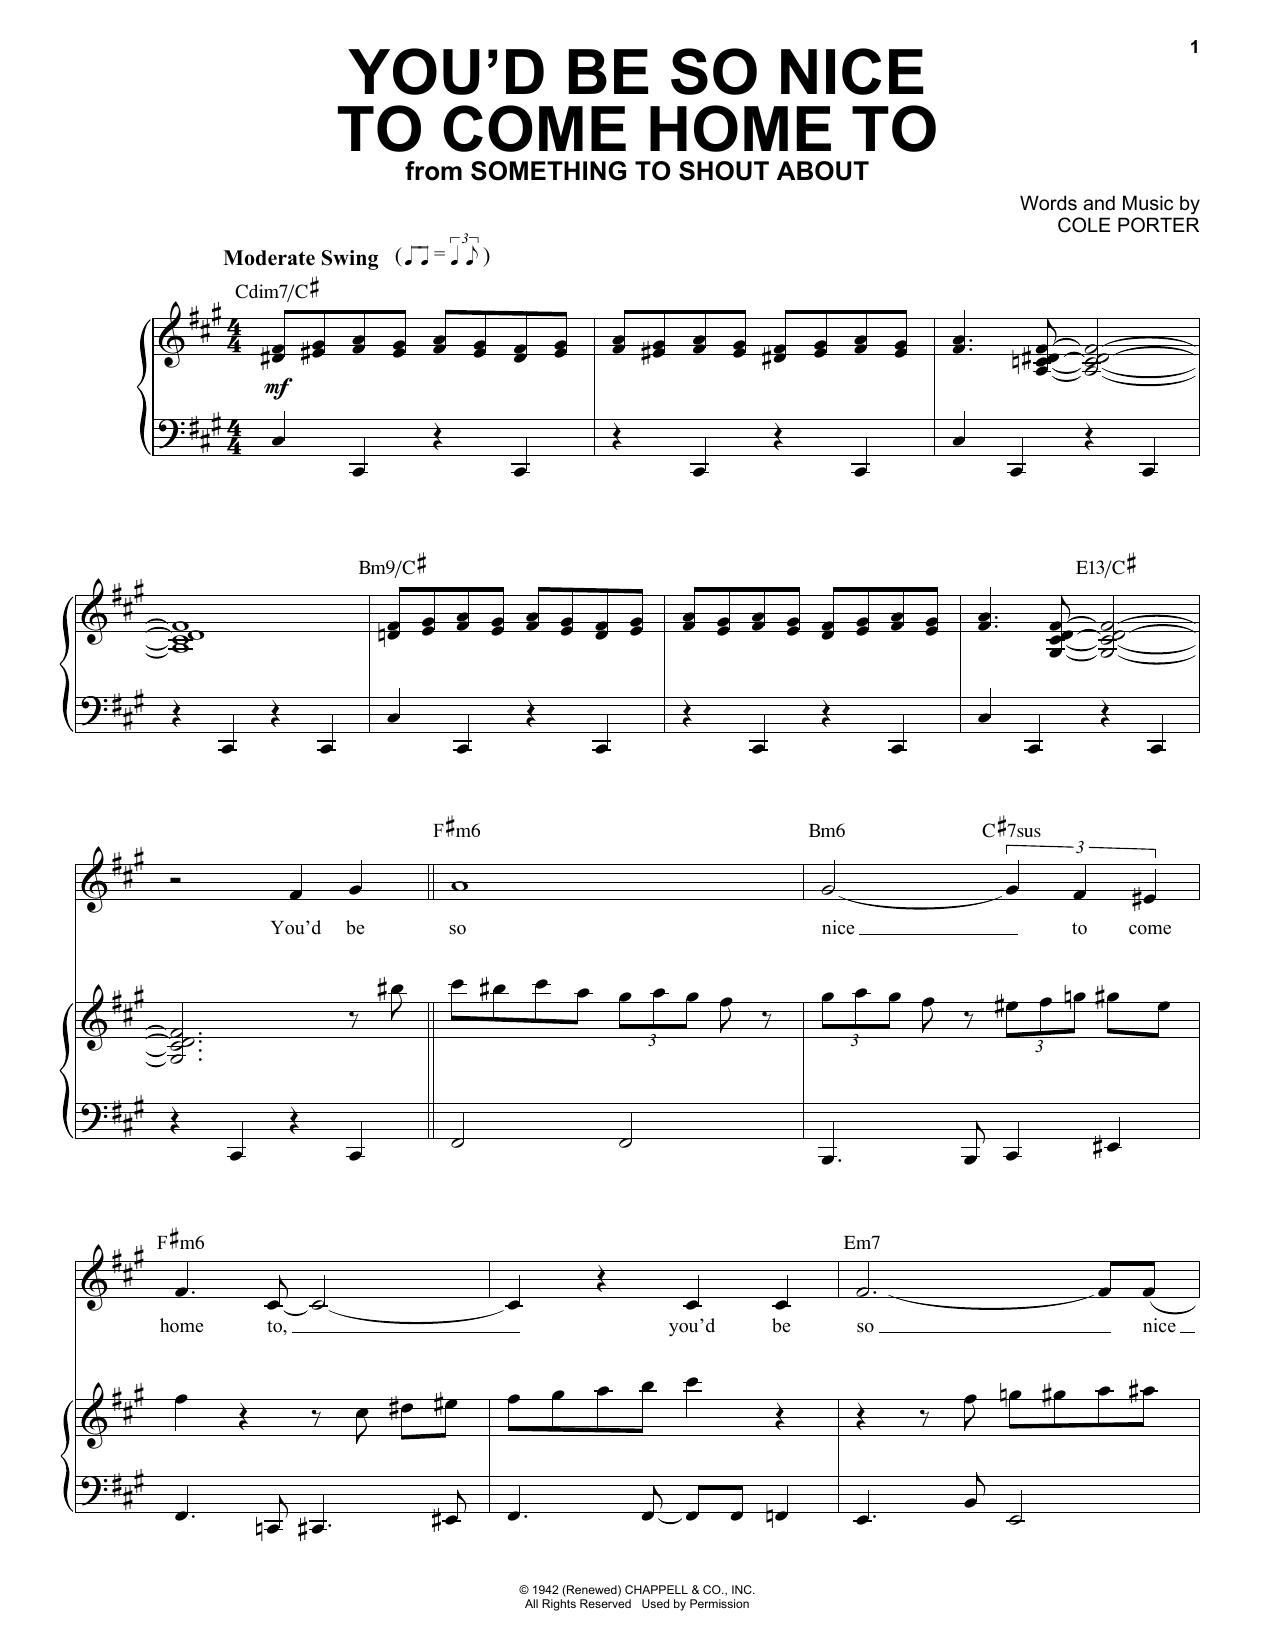 Download Frank Sinatra You'd Be So Nice To Come Home To Sheet Music